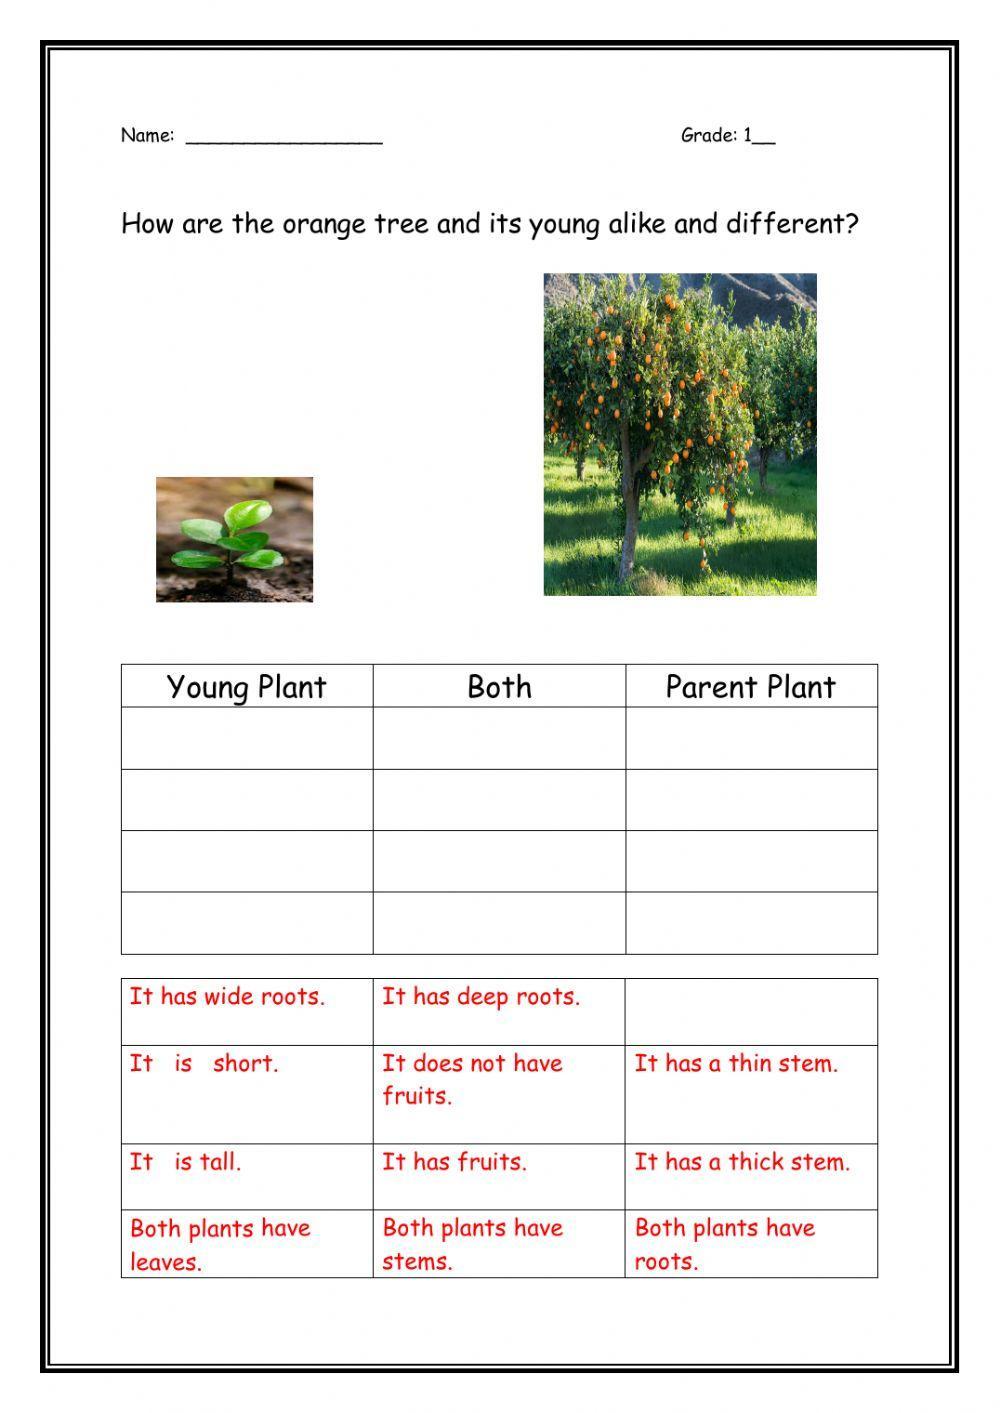 How are plants alike and different?